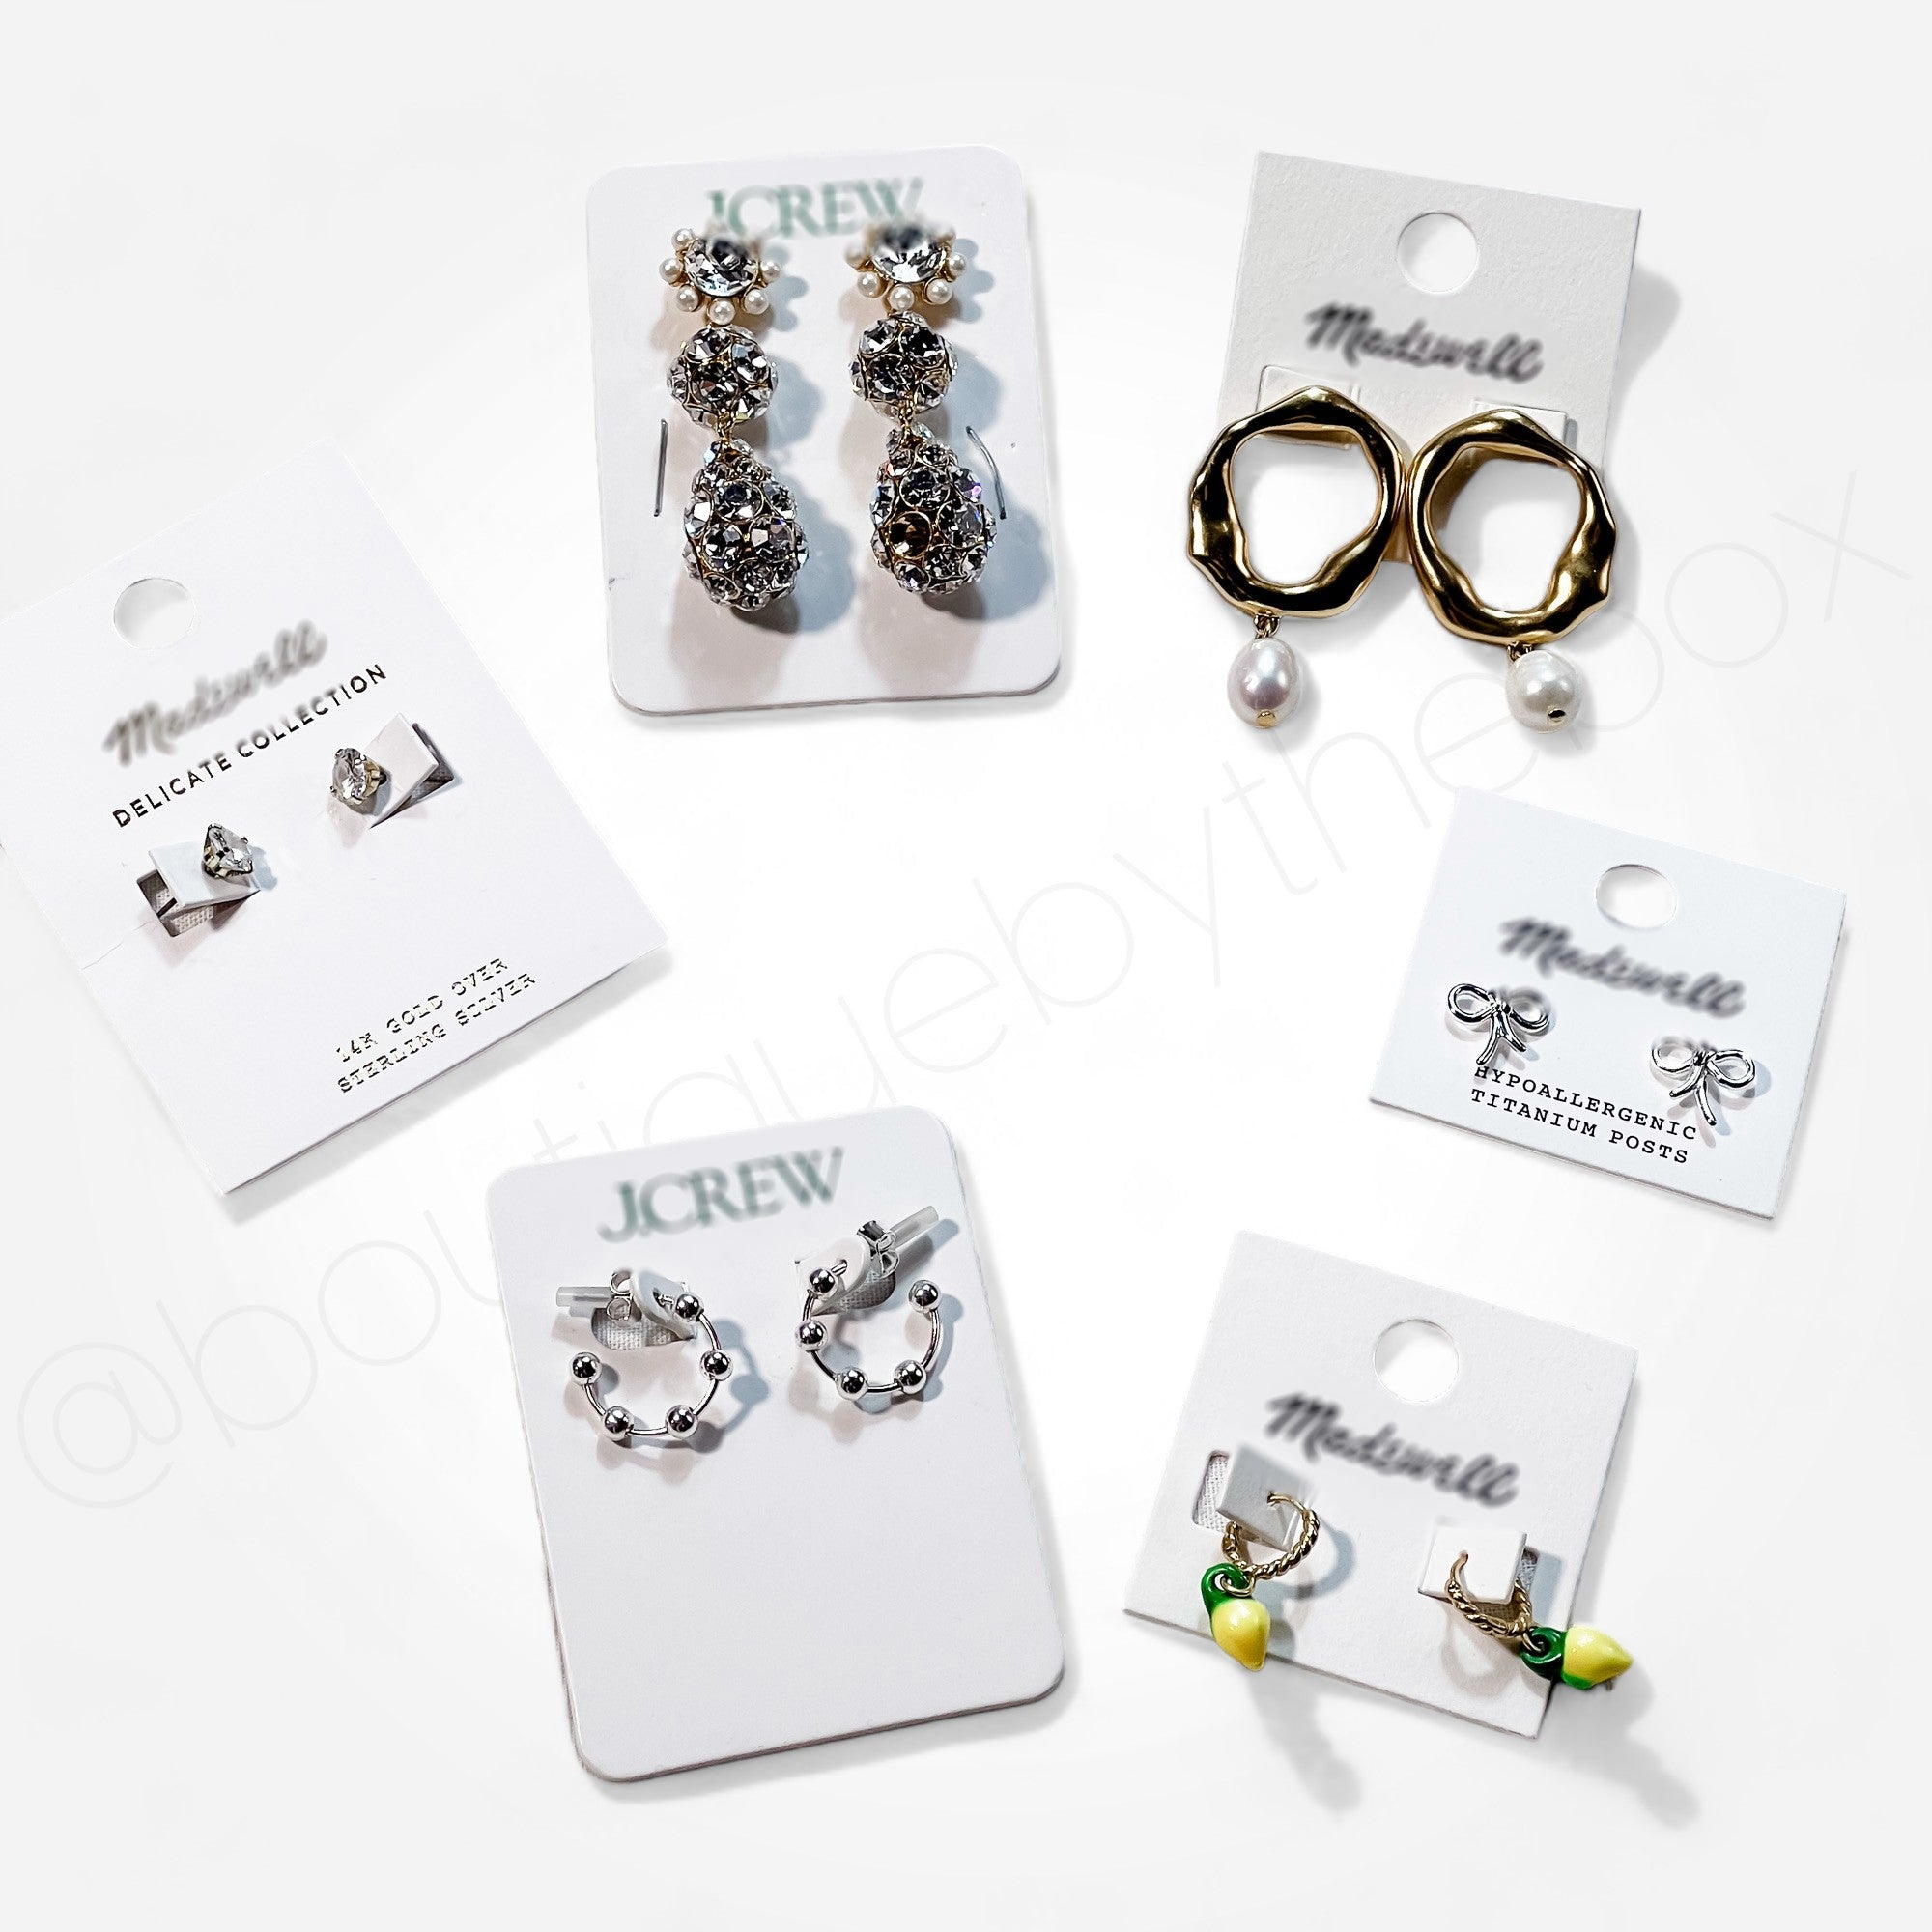 MDWLL + JCRW Jewelry & Accessories New + Customer Returns Wholesale - Boutique by the Box Wholesale for Resellers